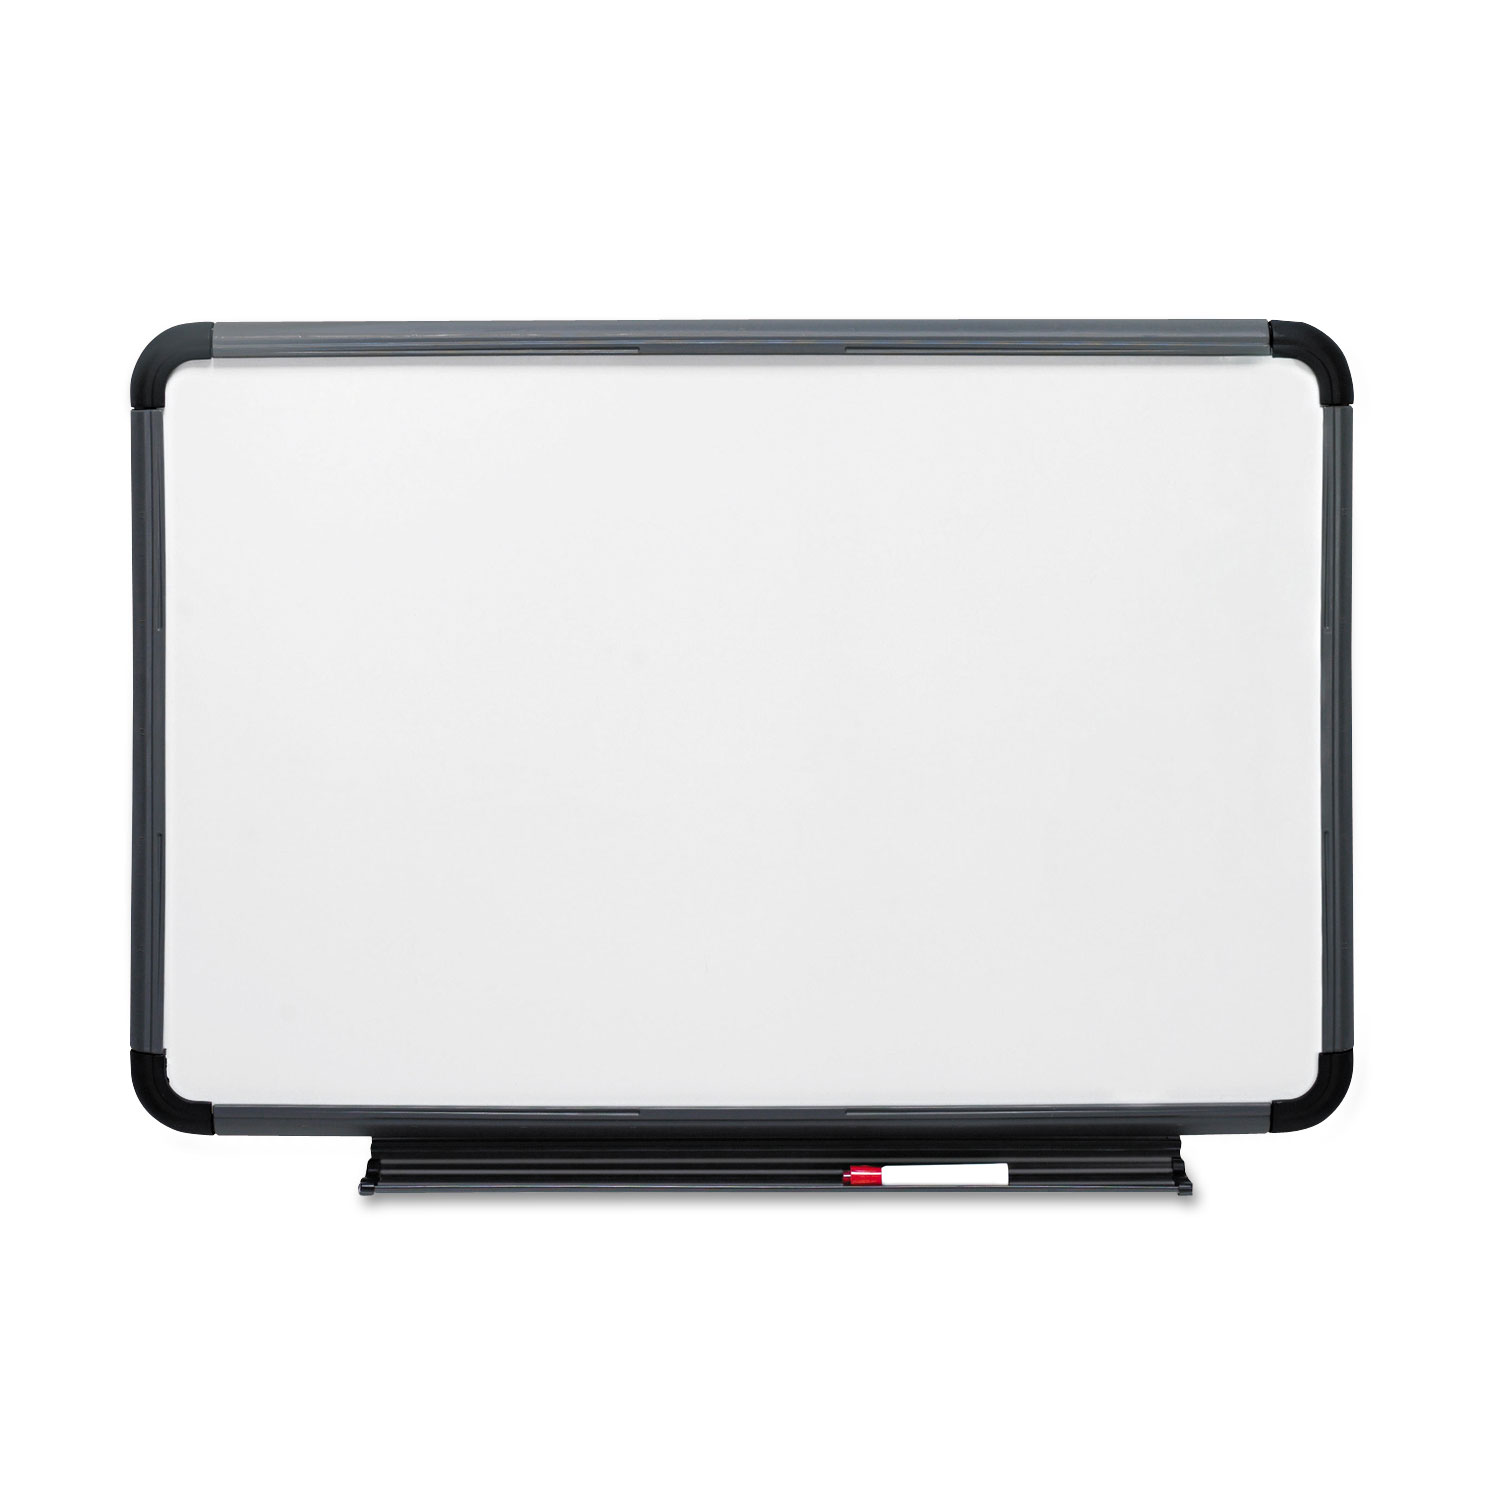  Iceberg 37039 Ingenuity Dry Erase Board, Resin Frame with Tray, 36 x 24, Charcoal (ICE37039) 